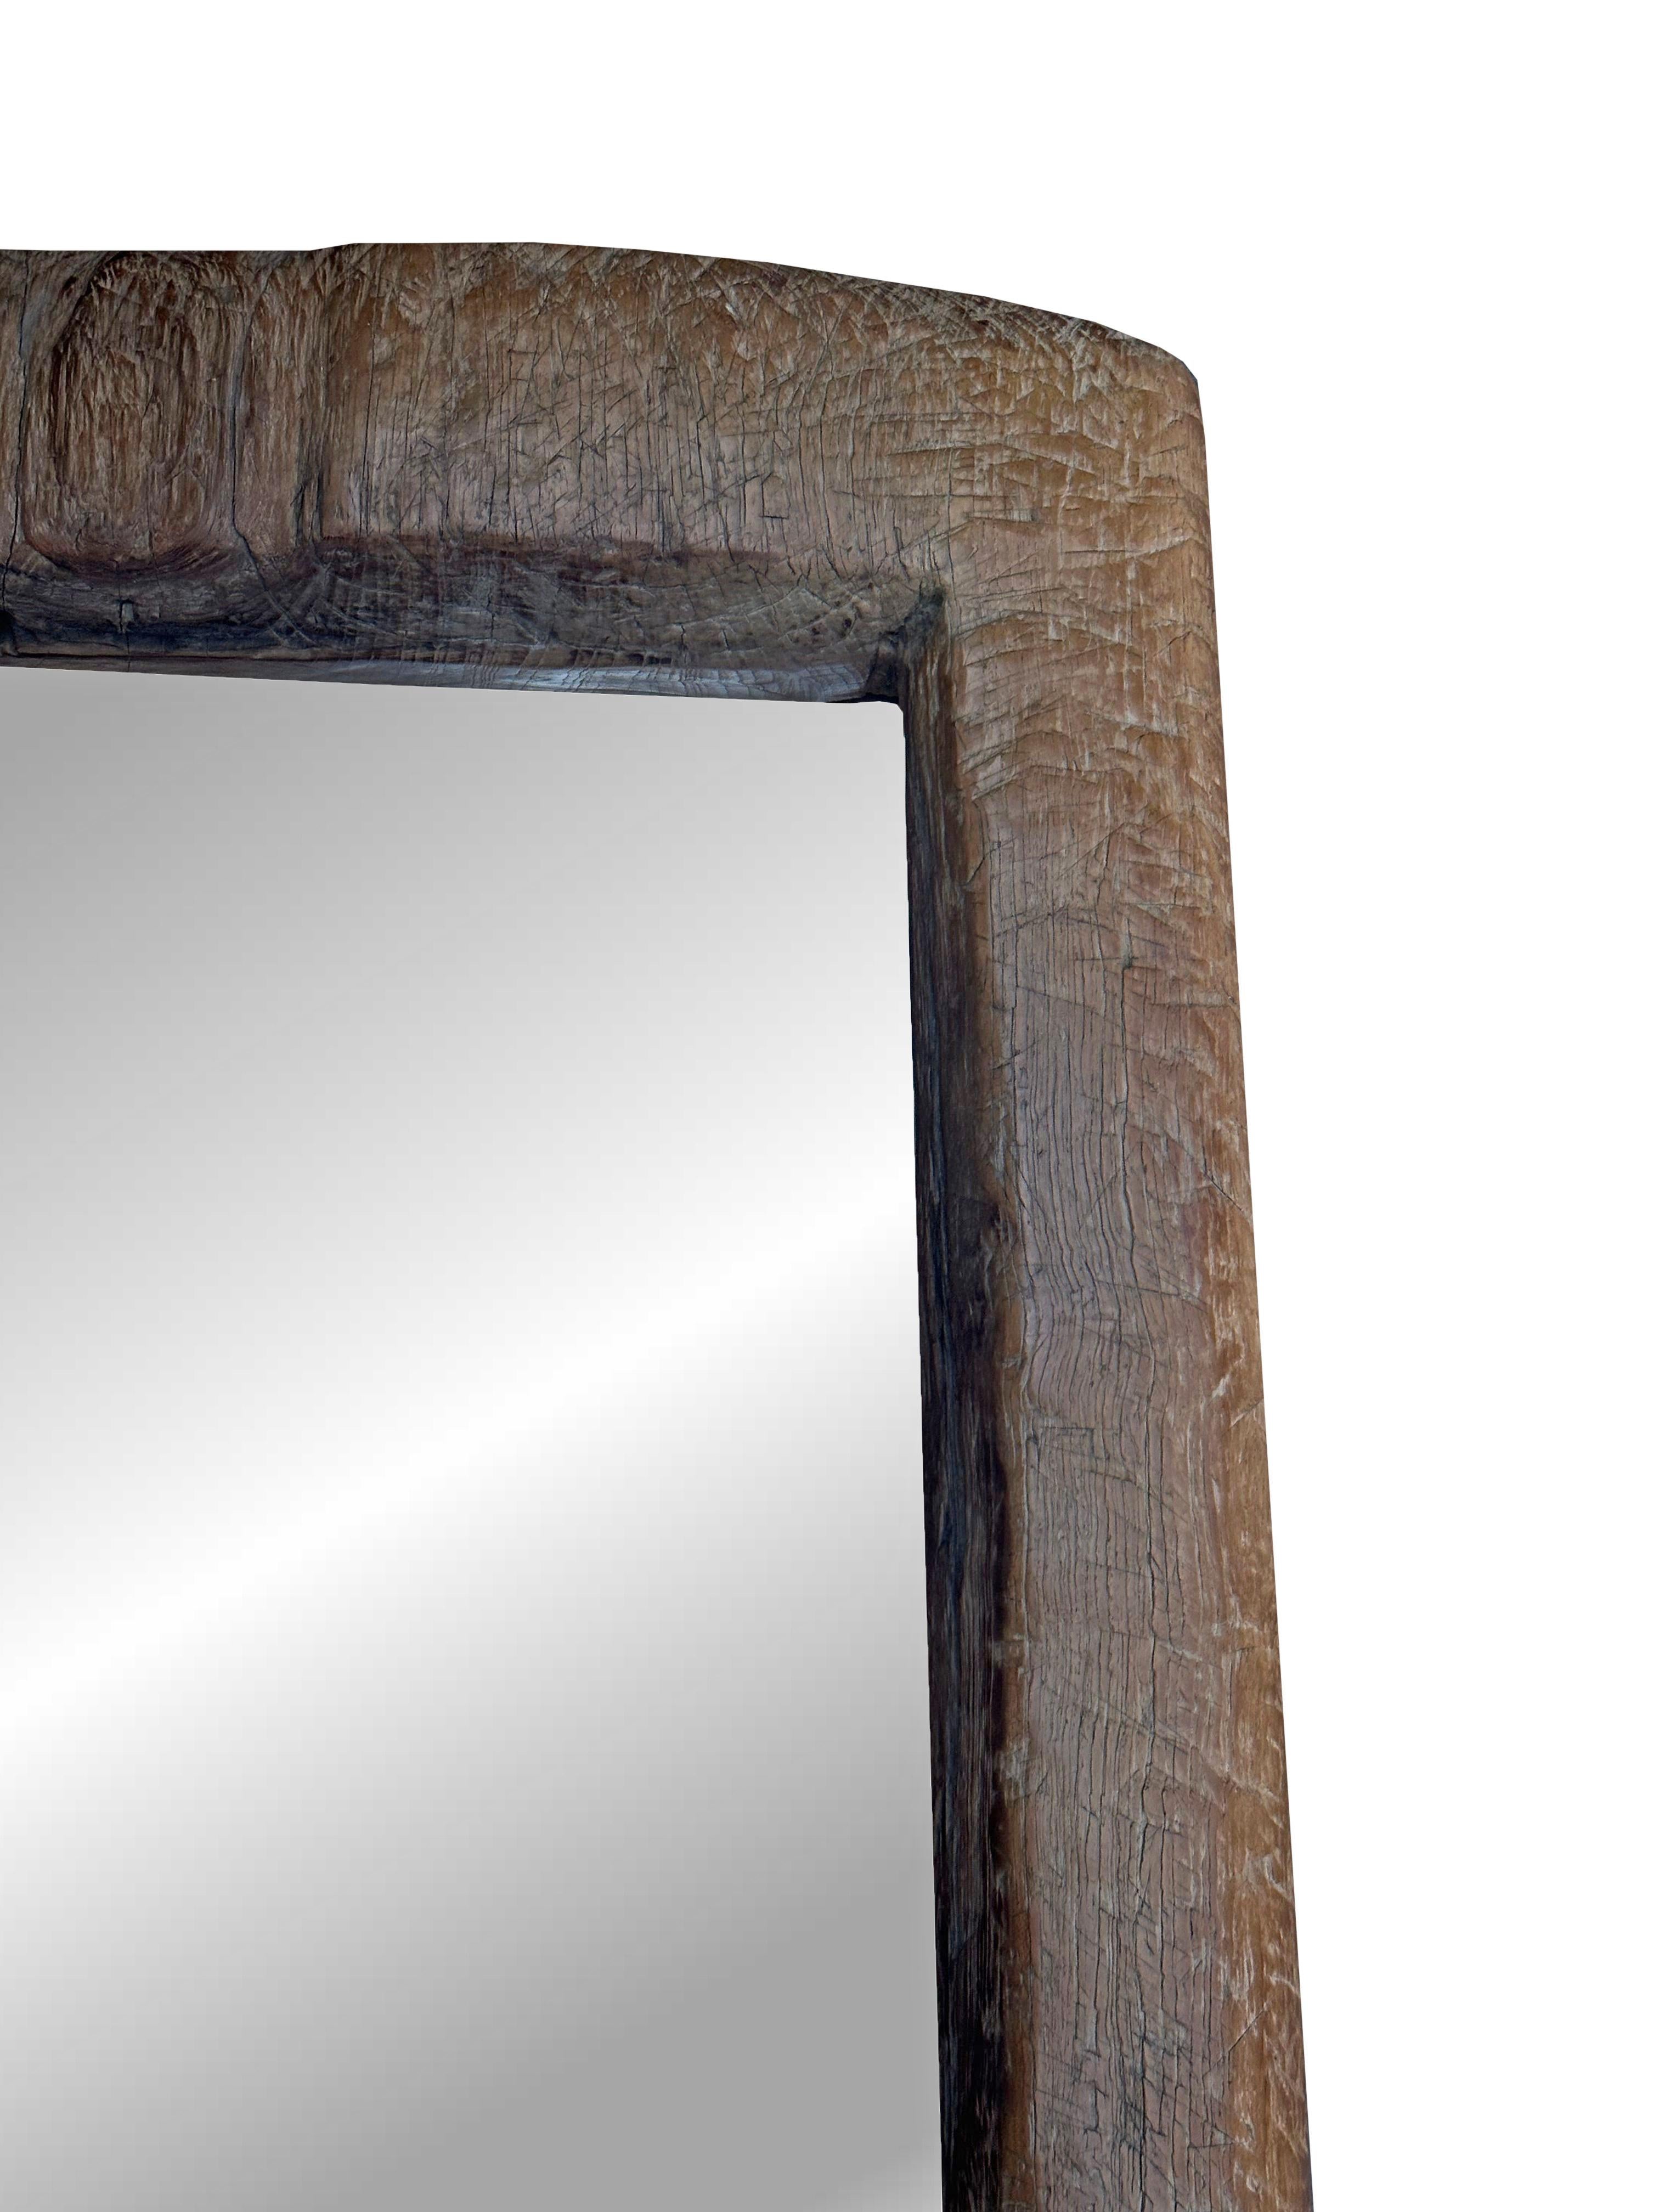 Rustic Teak Wood Mirror With Wonderful Age Related Patina & Markings In Good Condition For Sale In Jimbaran, Bali